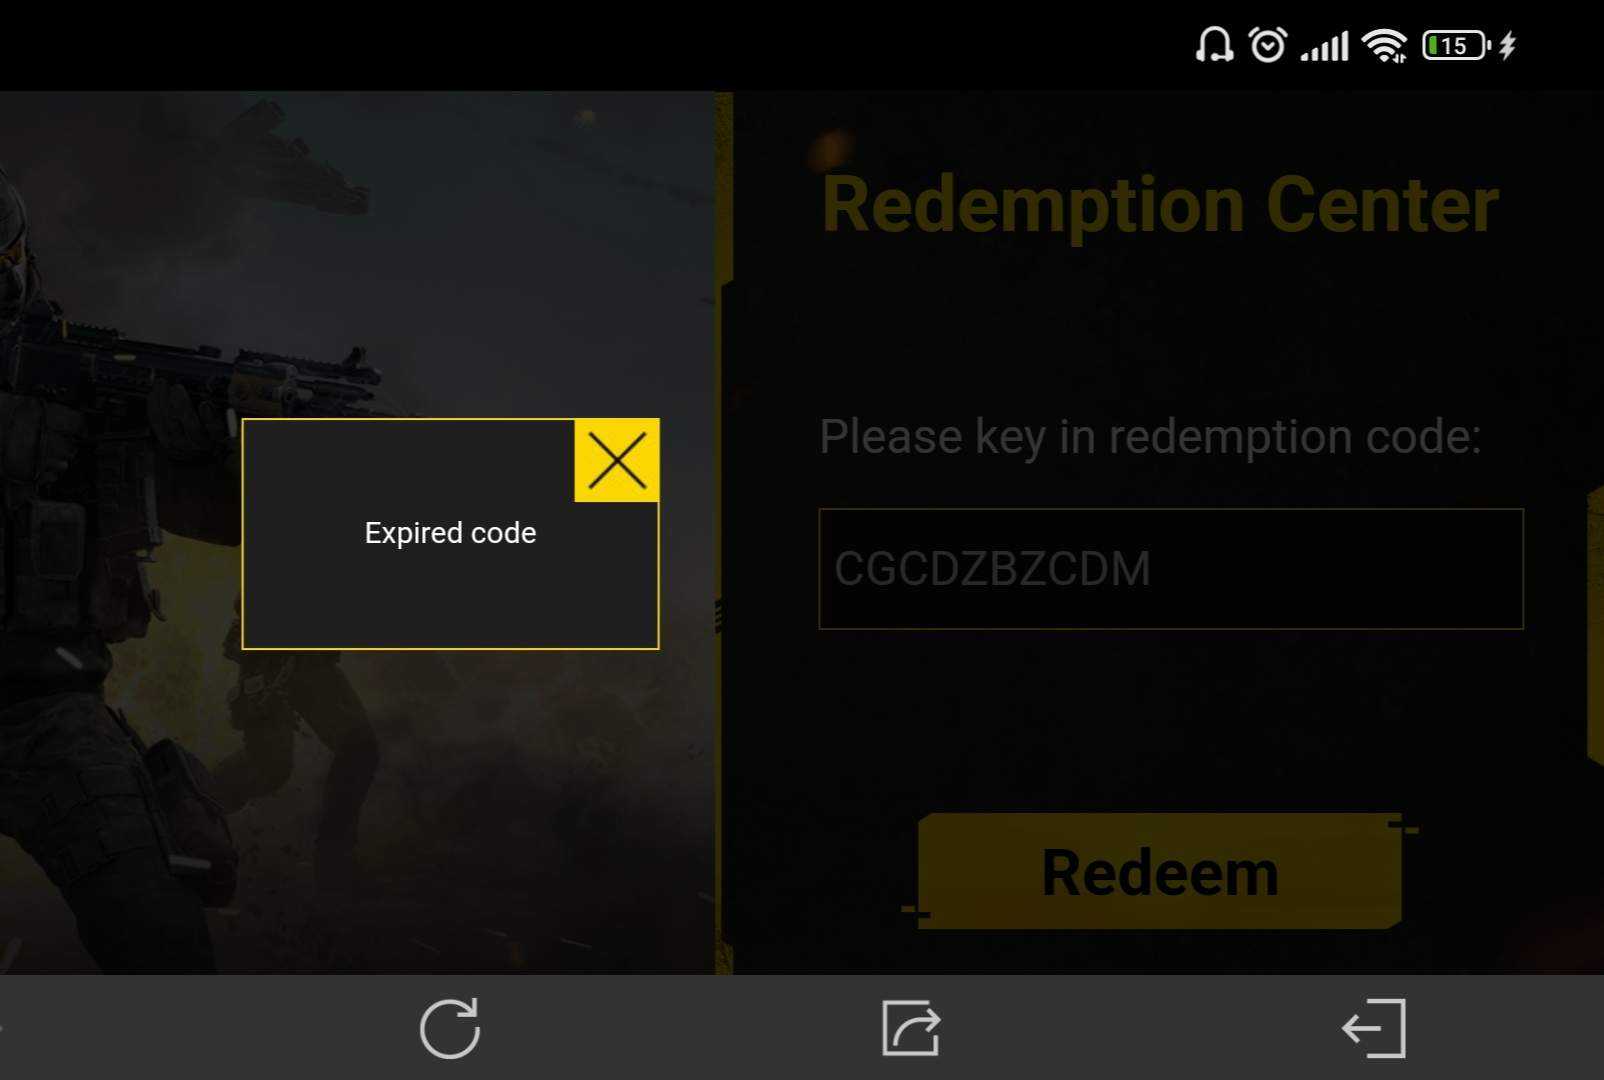 Today's 2 New Working Redeem Code 2023, Cod mobile Redemption Code 2023